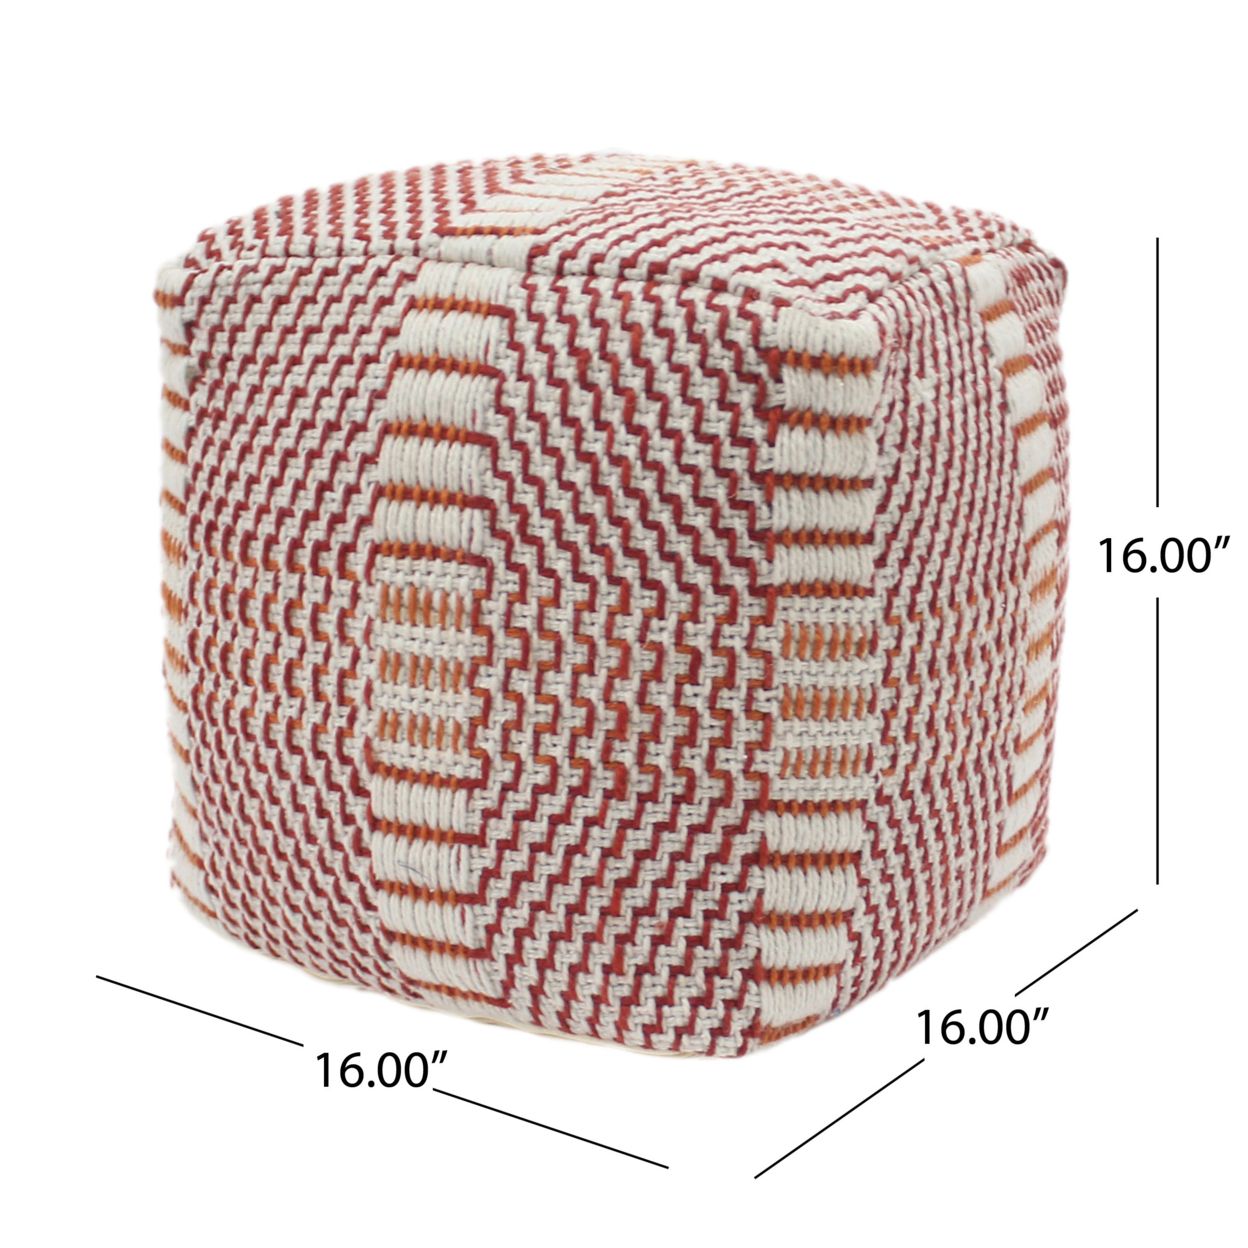 Dexter Bay Outdoor Handcrafted Boho Water Resistant Cube Pouf, Red and Orange - image 3 of 5